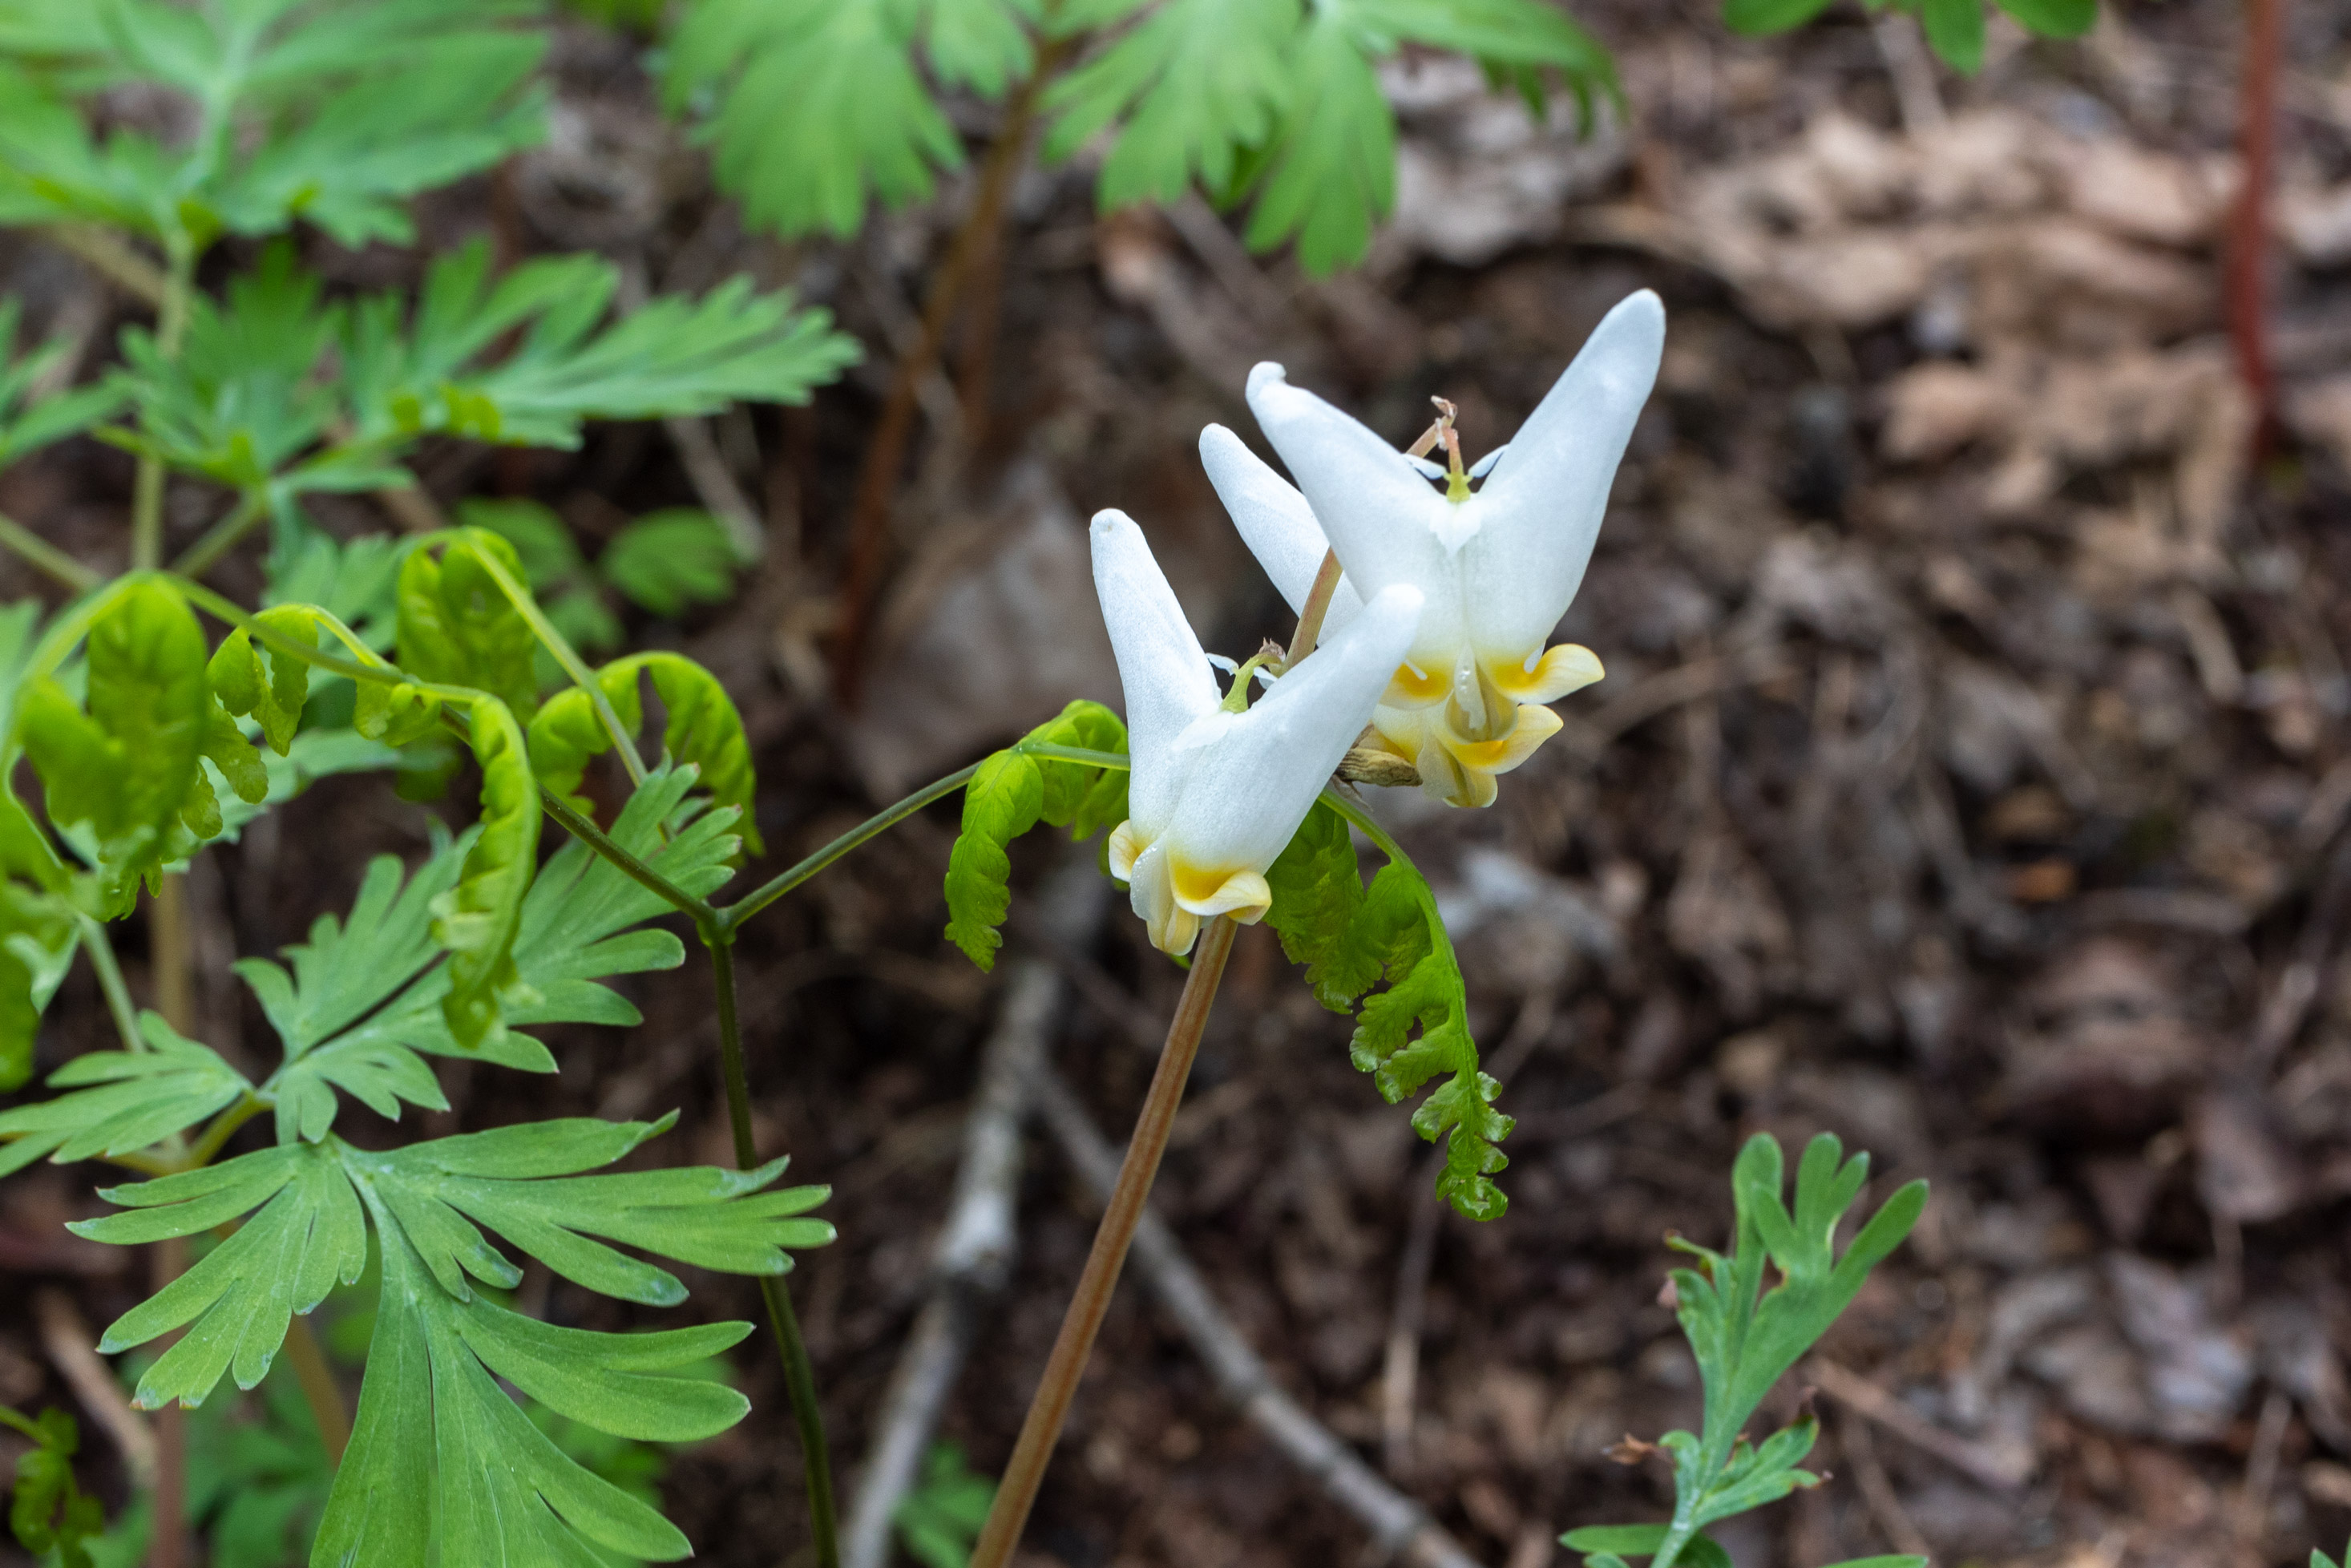 Small white flowers with bits of yellow that are shaped like boomerangs on the forest floor